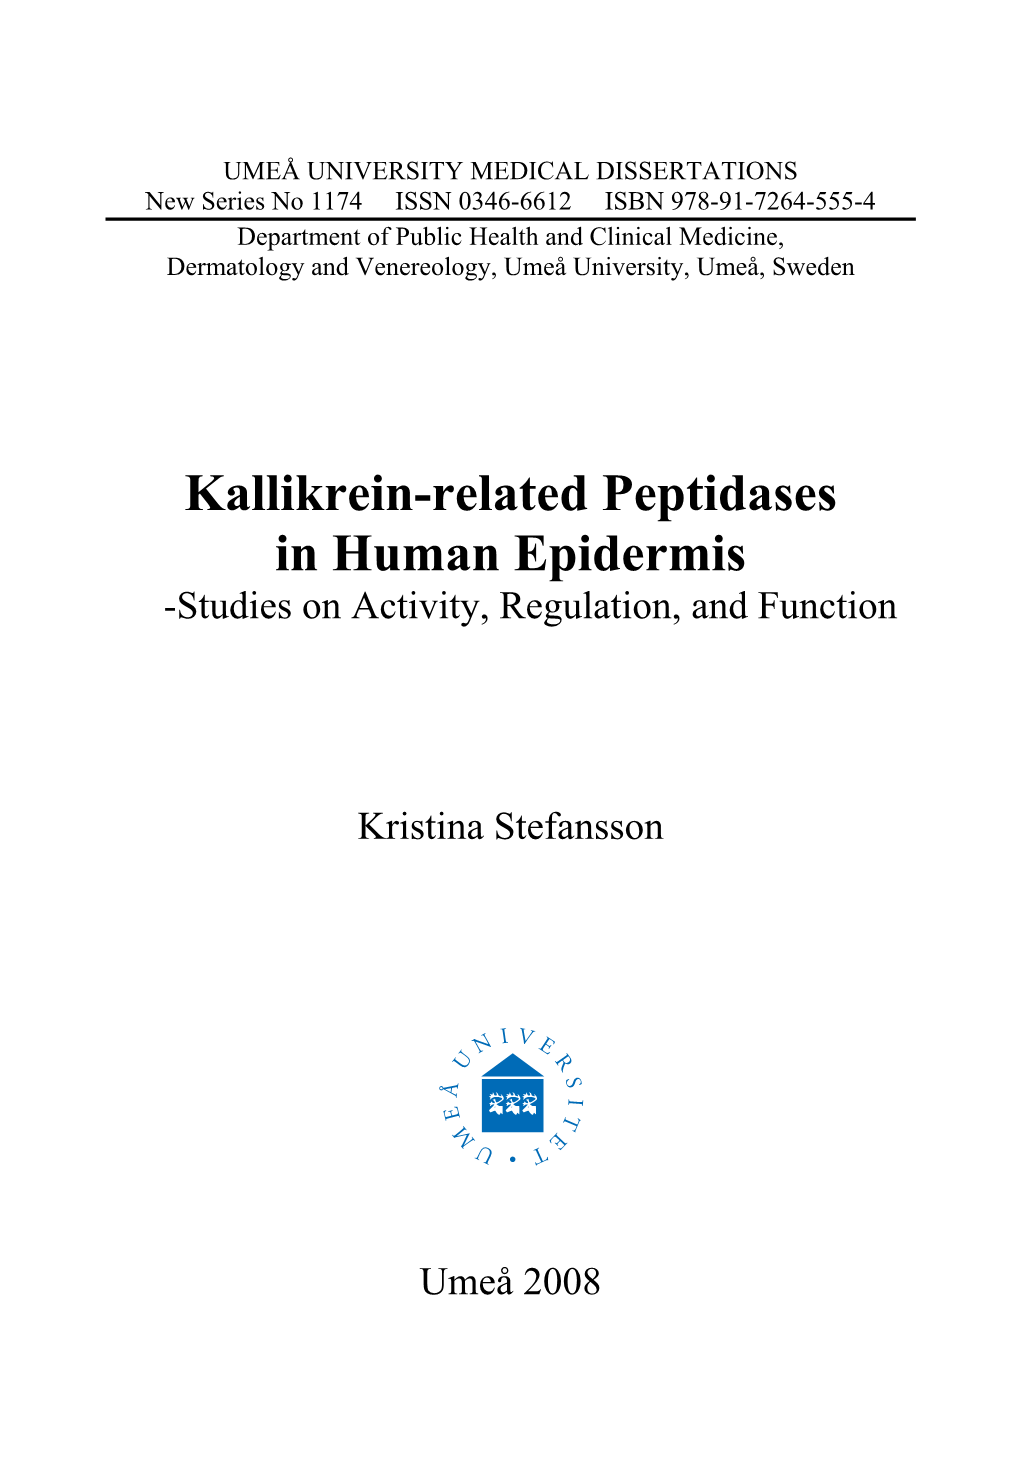 Kallikrein-Related Peptidases in Human Epidermis -Studies on Activity, Regulation, and Function